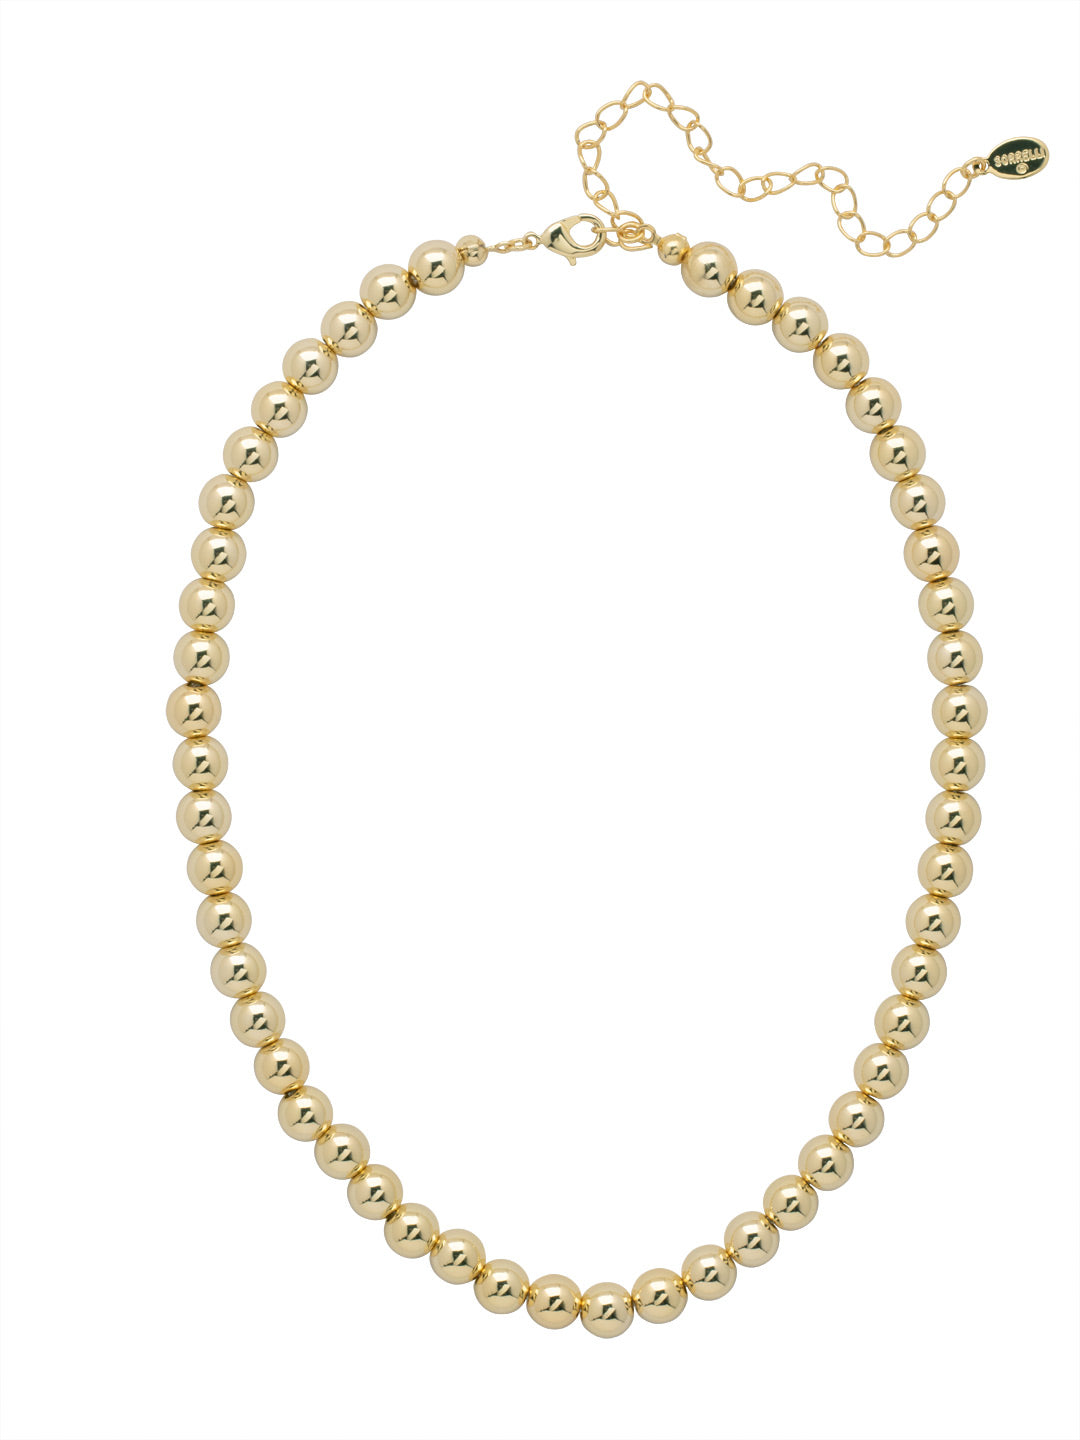 Zola Tennis Necklace - 4NFJ21BGMTL - <p>The Zola Tennis Necklace features repeating metal beads on an adjustable chain, secured with a lobster claw clasp. From Sorrelli's Bare Metallic collection in our Bright Gold-tone finish.</p>